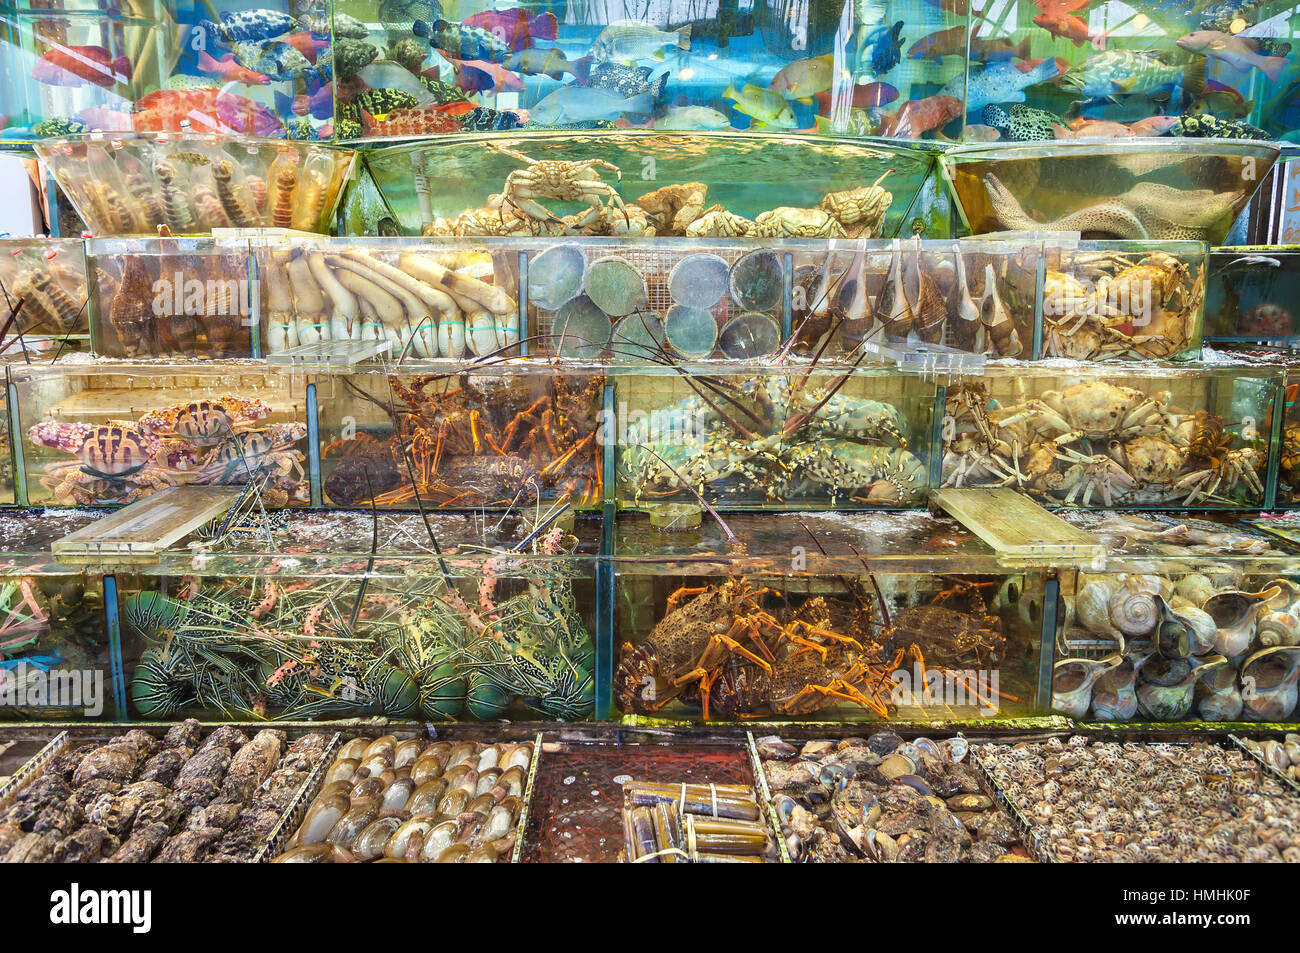 Live seafood outside a restaurant in Sai Kung, Hong Kong Stock Photo